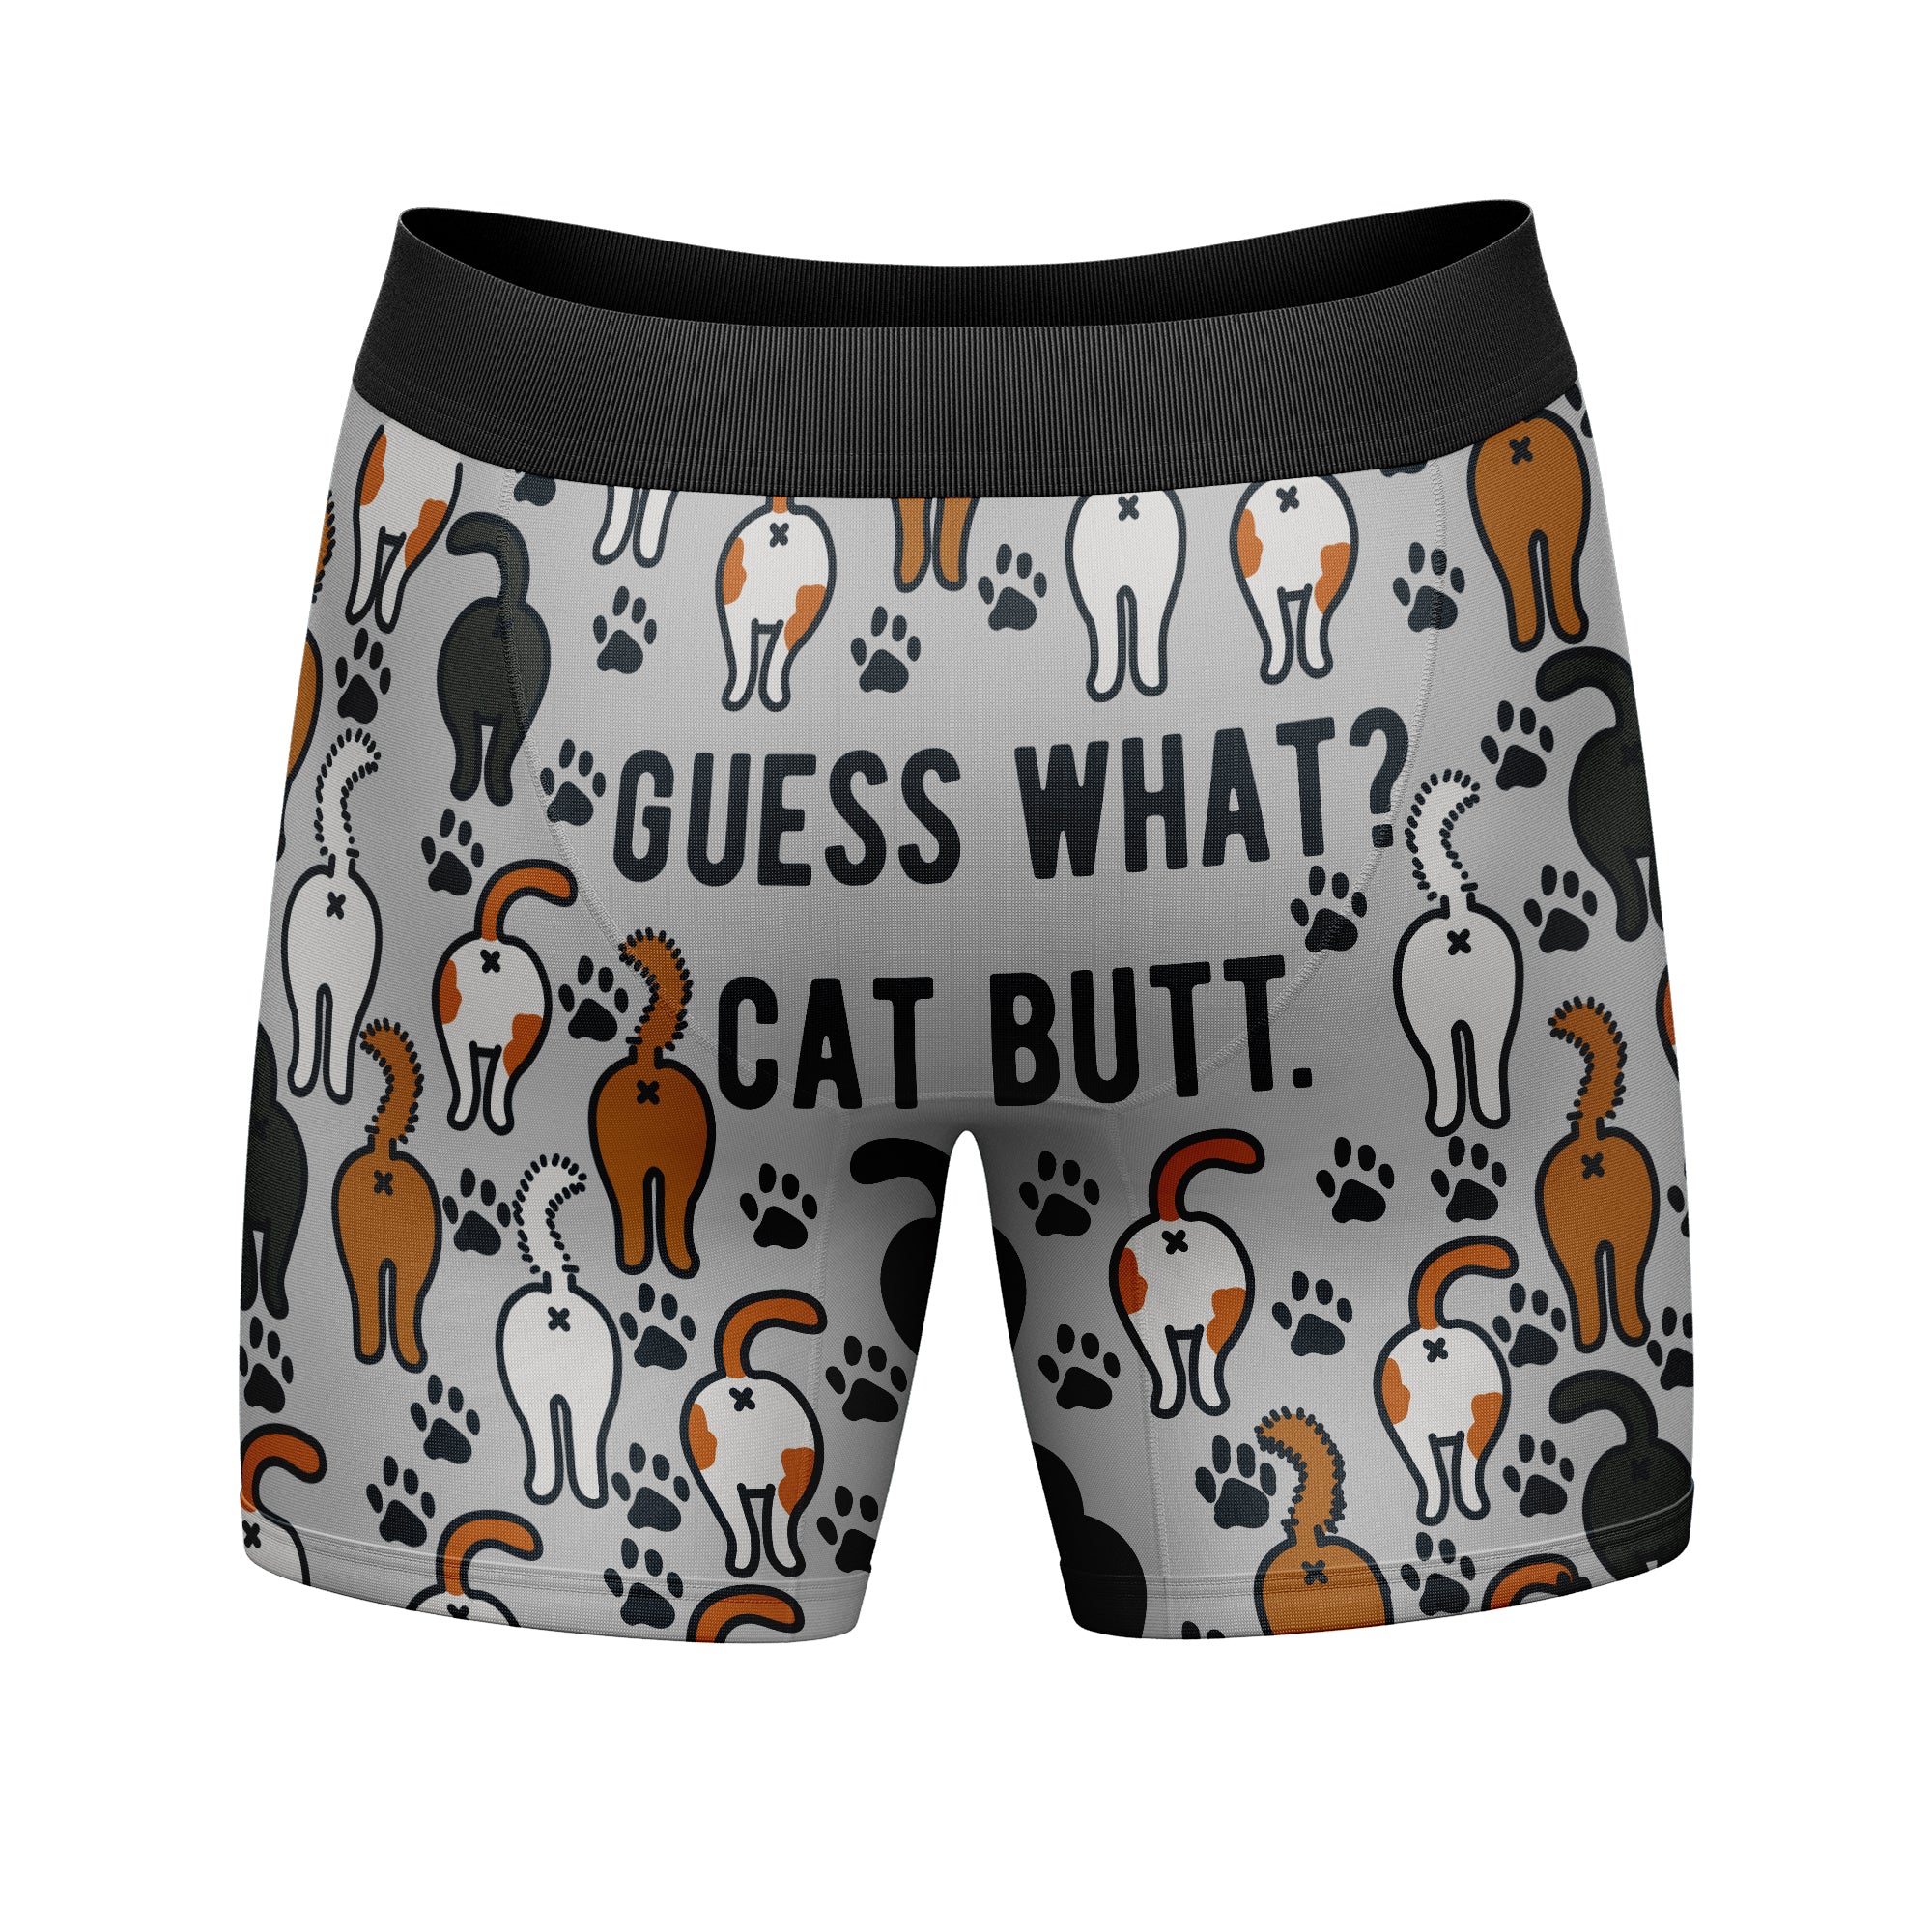 Funny Cat Butt Guess What Cat Butt Nerdy Animal Cat Sarcastic Tee